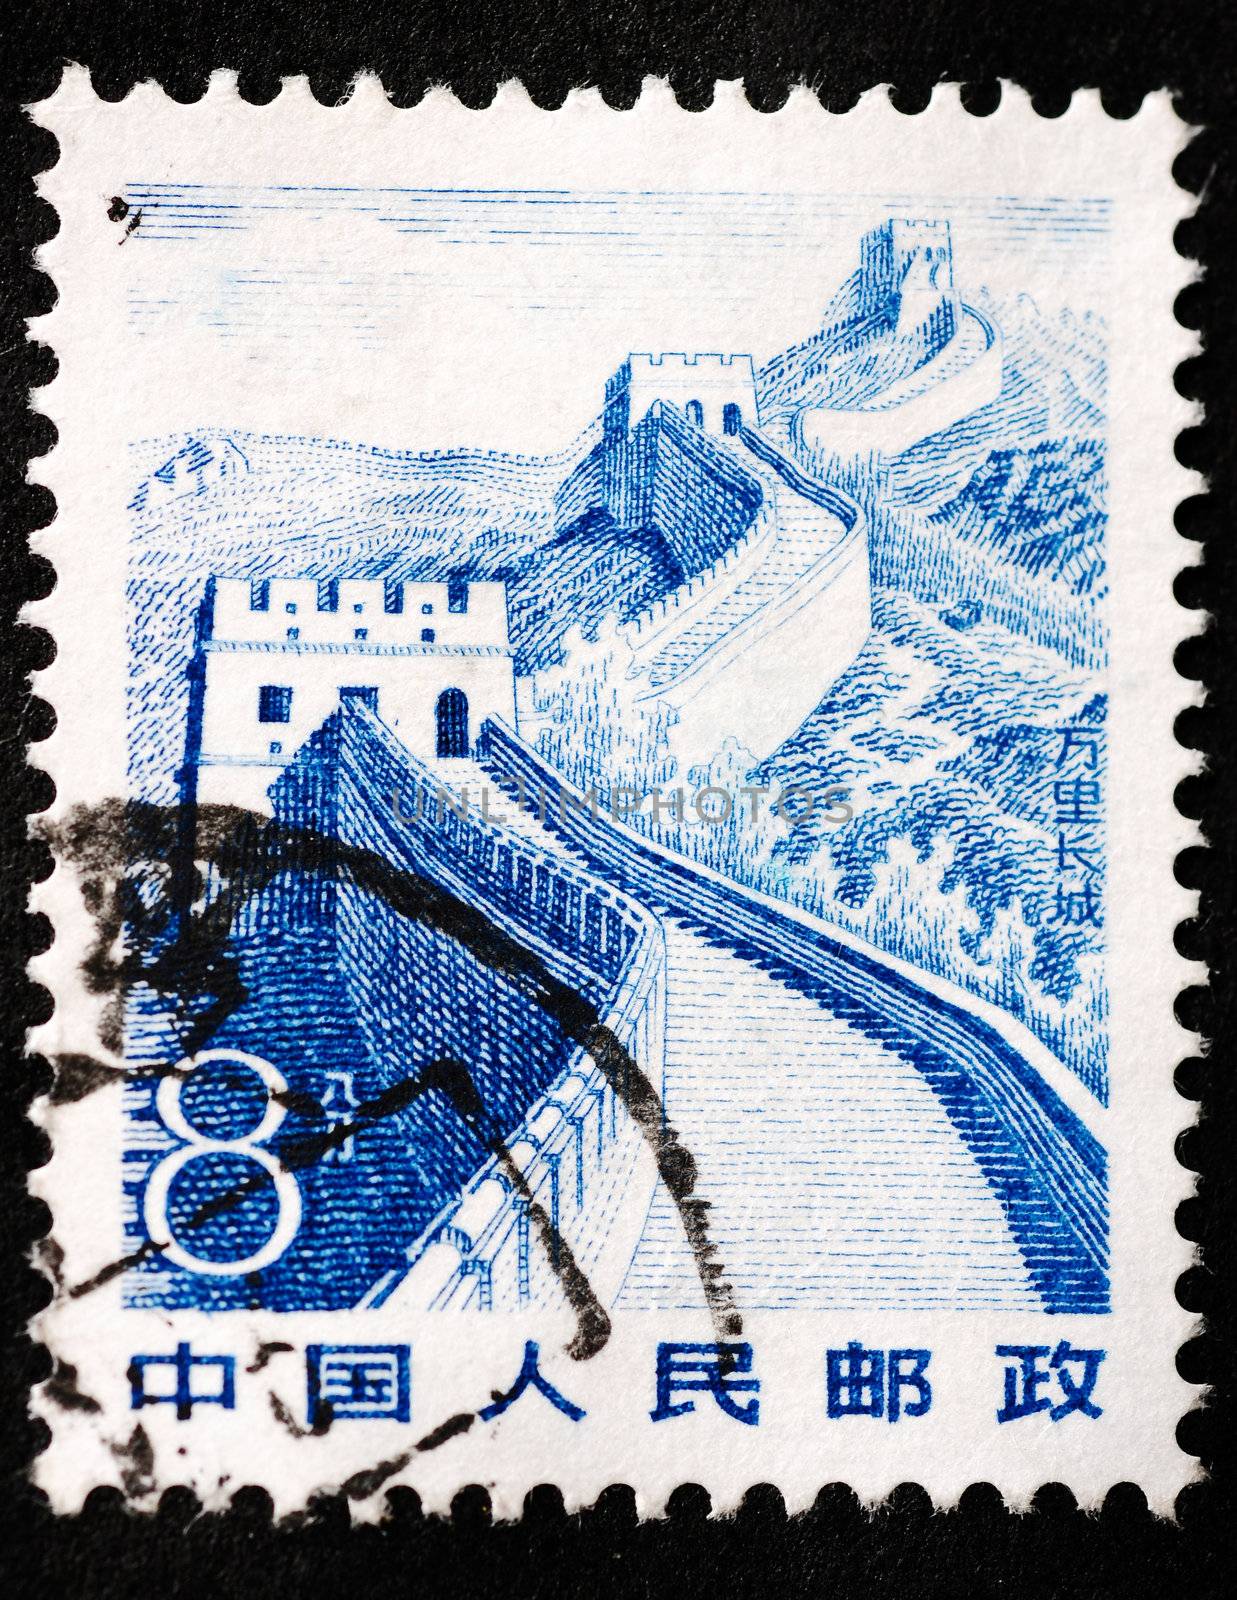 CHINA - CIRCA 1983: A stamp printed in China shows the great wal by bbbar